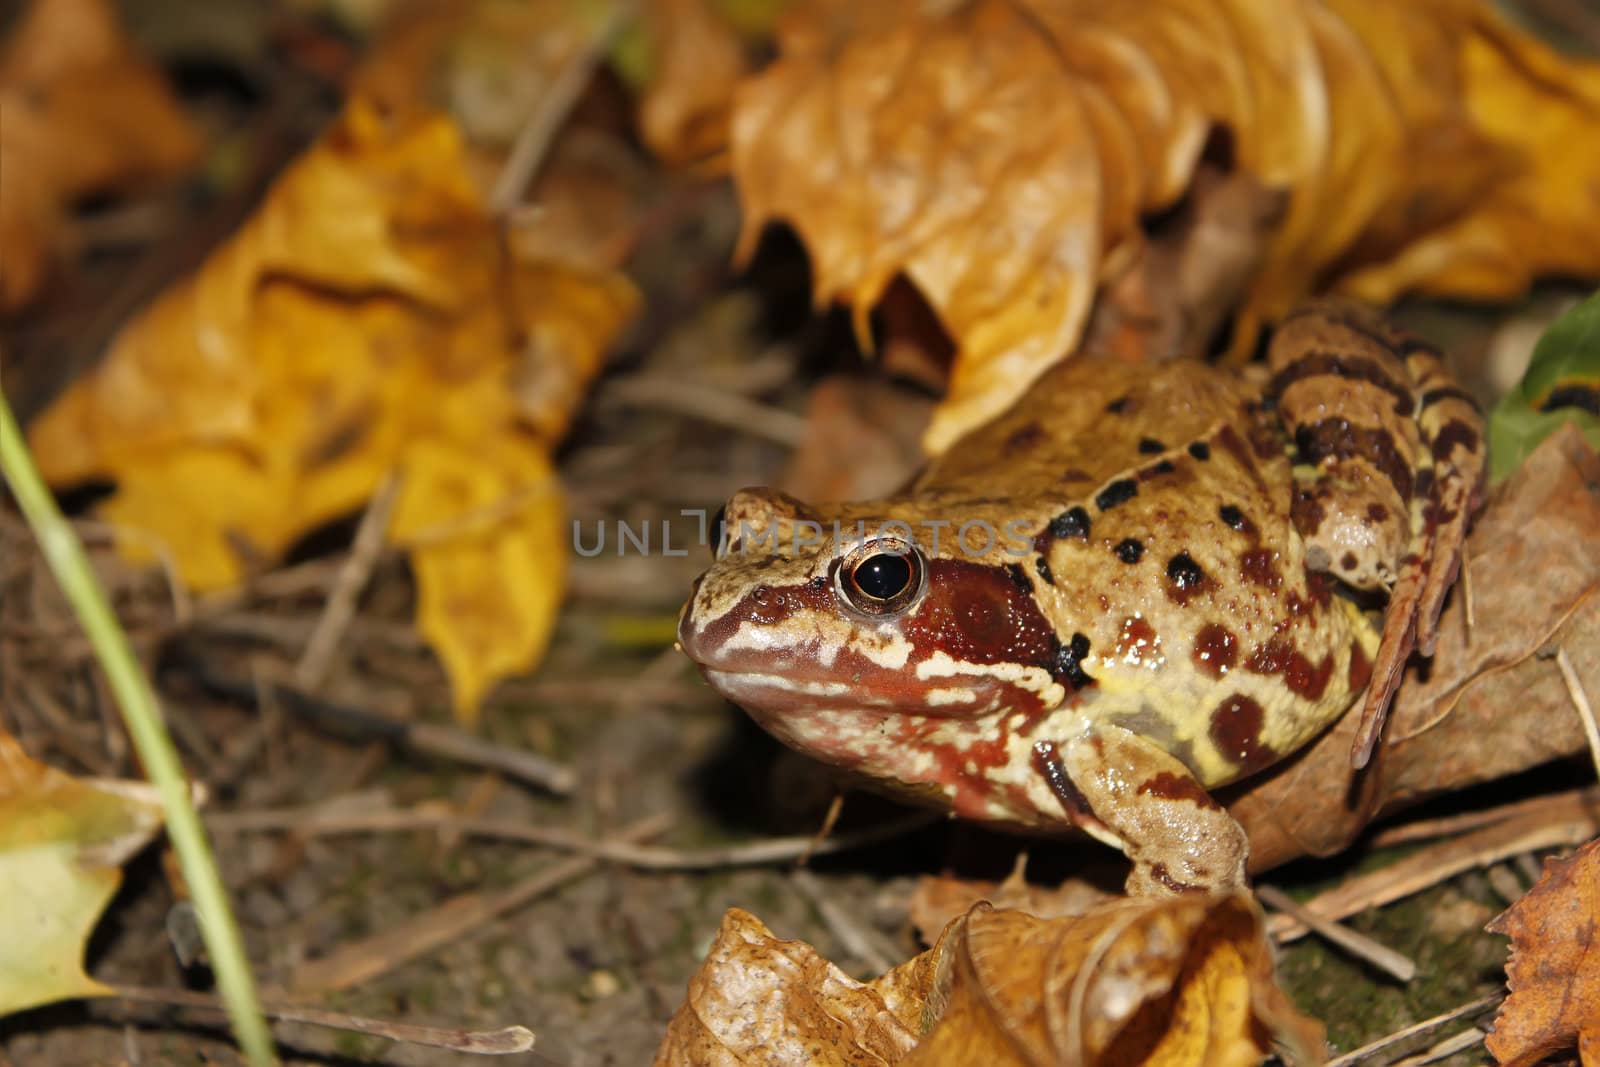 Meadows frog in the woods in autumn (I) by qiiip